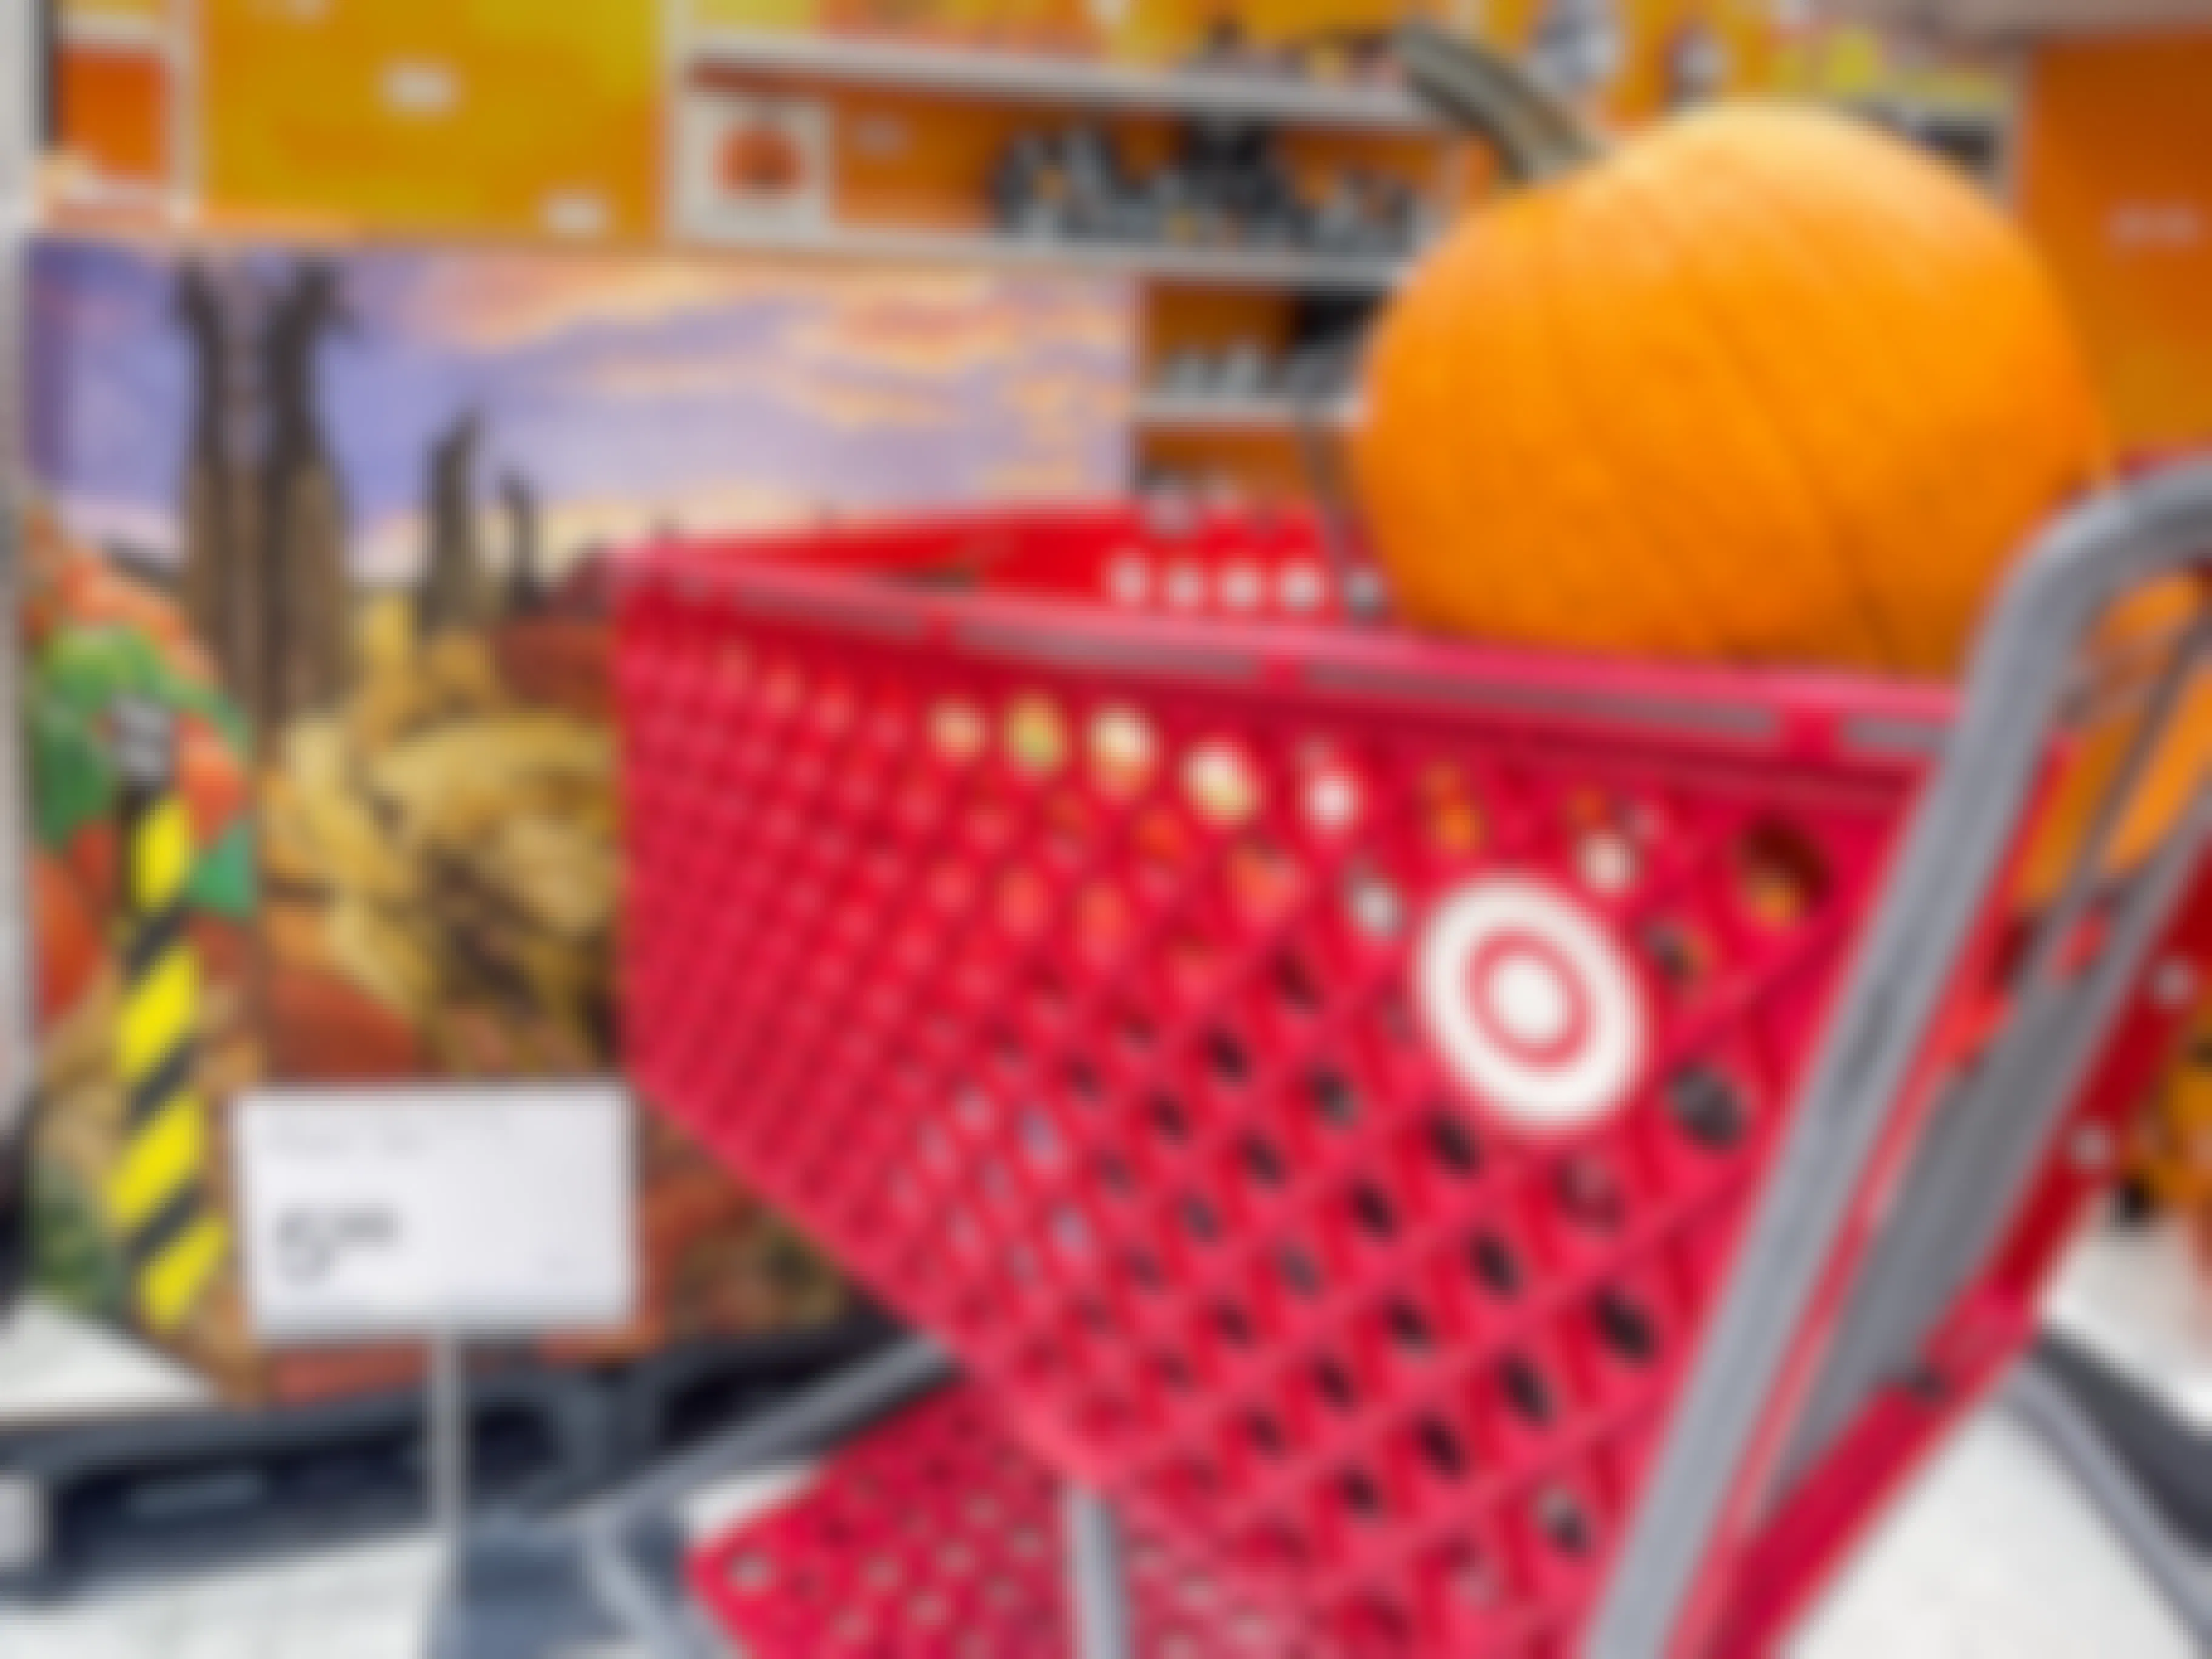 A pumpkin in a Target shopping cart parked next to a large box of more pumpkins and a sign that shows the price to be $5.99